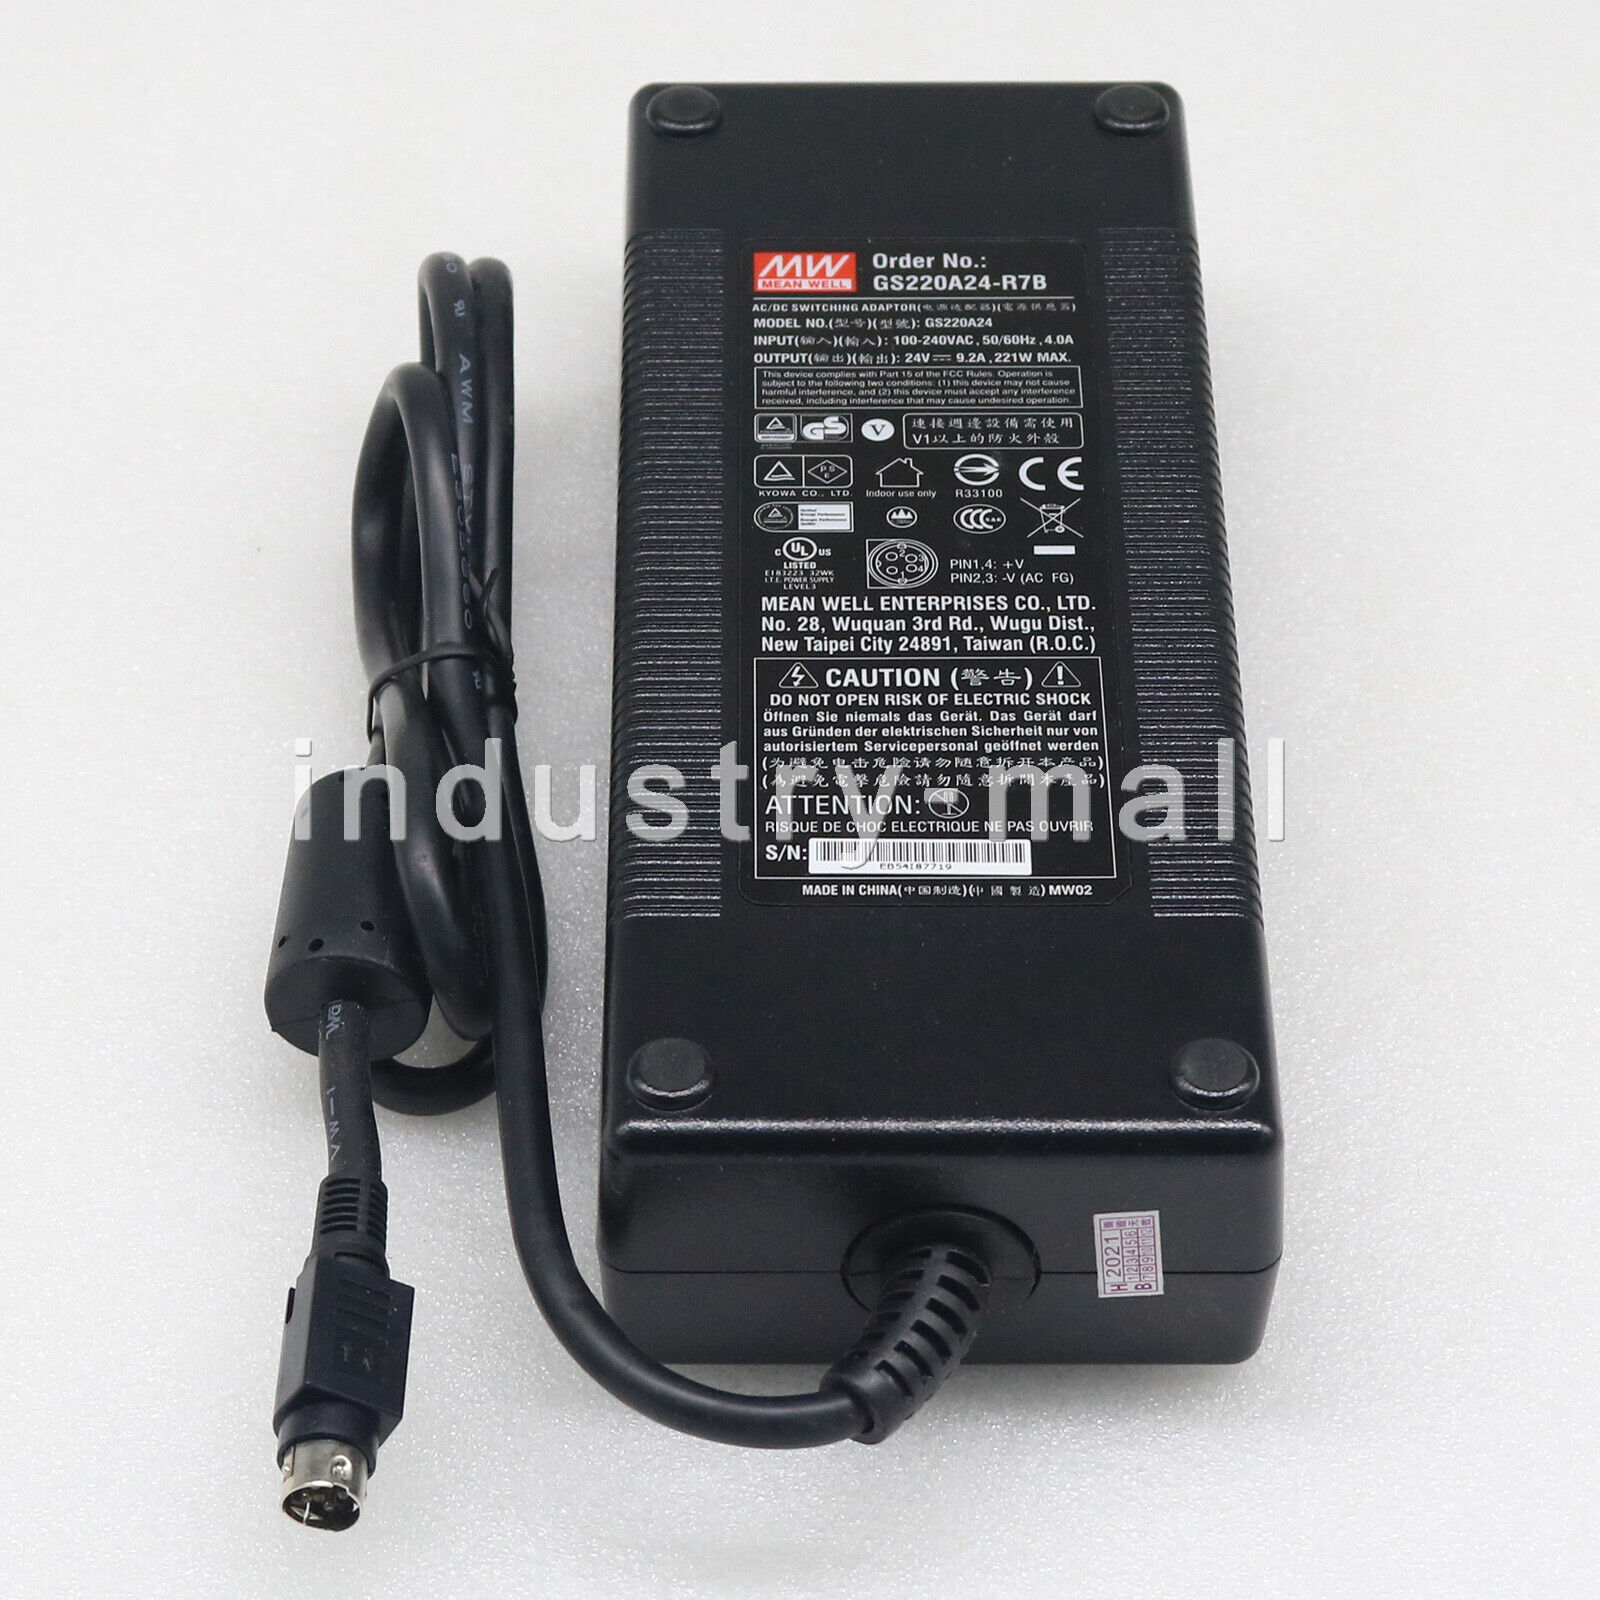 For MEAN WELL GS220A24-R7B 24V 9.2A New power supply Model: GS220A24-R7B UPC: Does not apply MPN: GS220A24-R7B Br - Click Image to Close